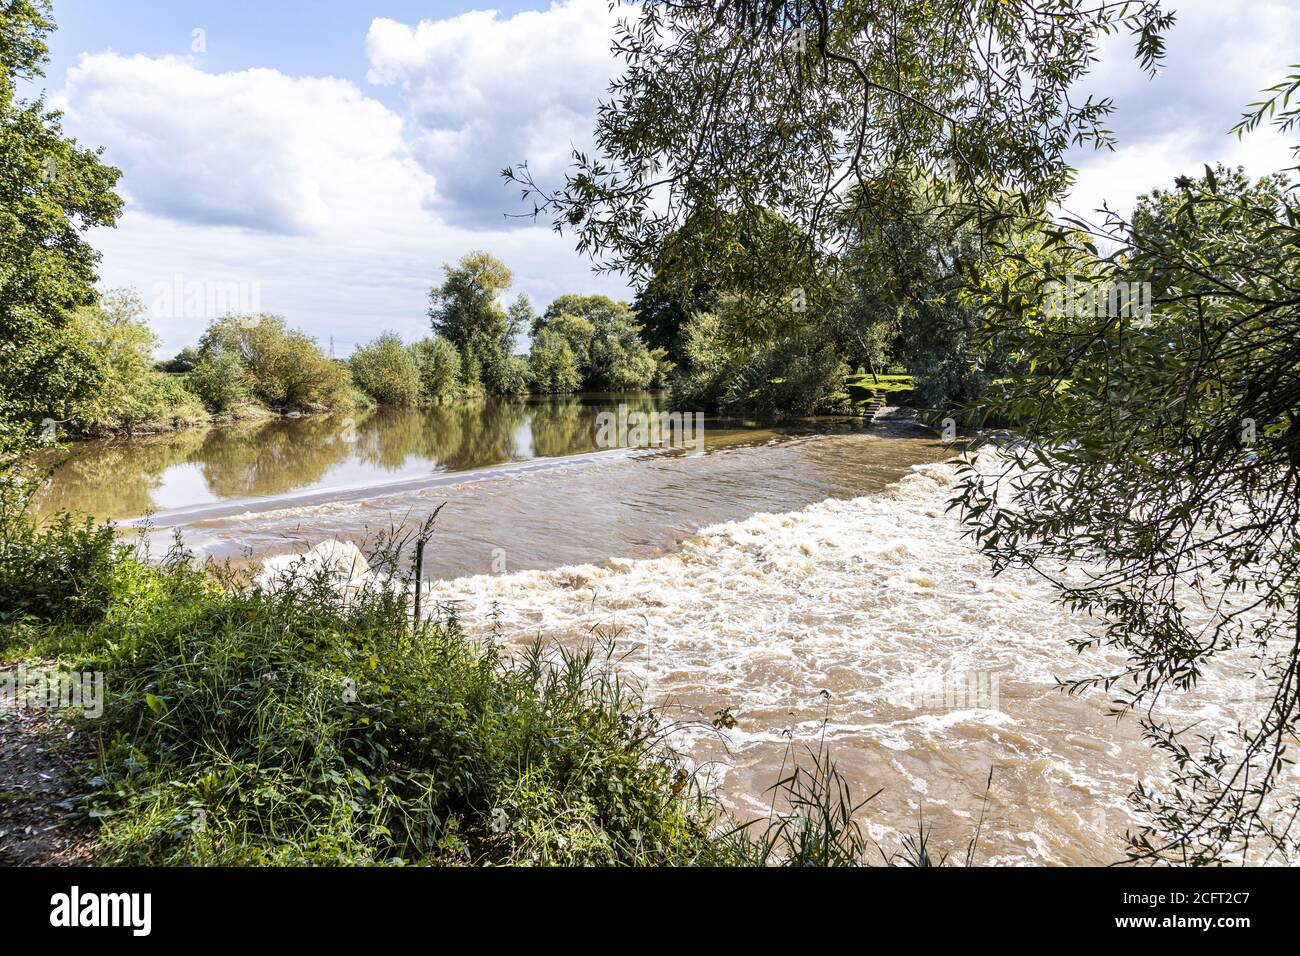 The weir on the River Severn at Upper Parting near the Severn Vale village of Maisemore, Gloucestershire UK Stock Photo